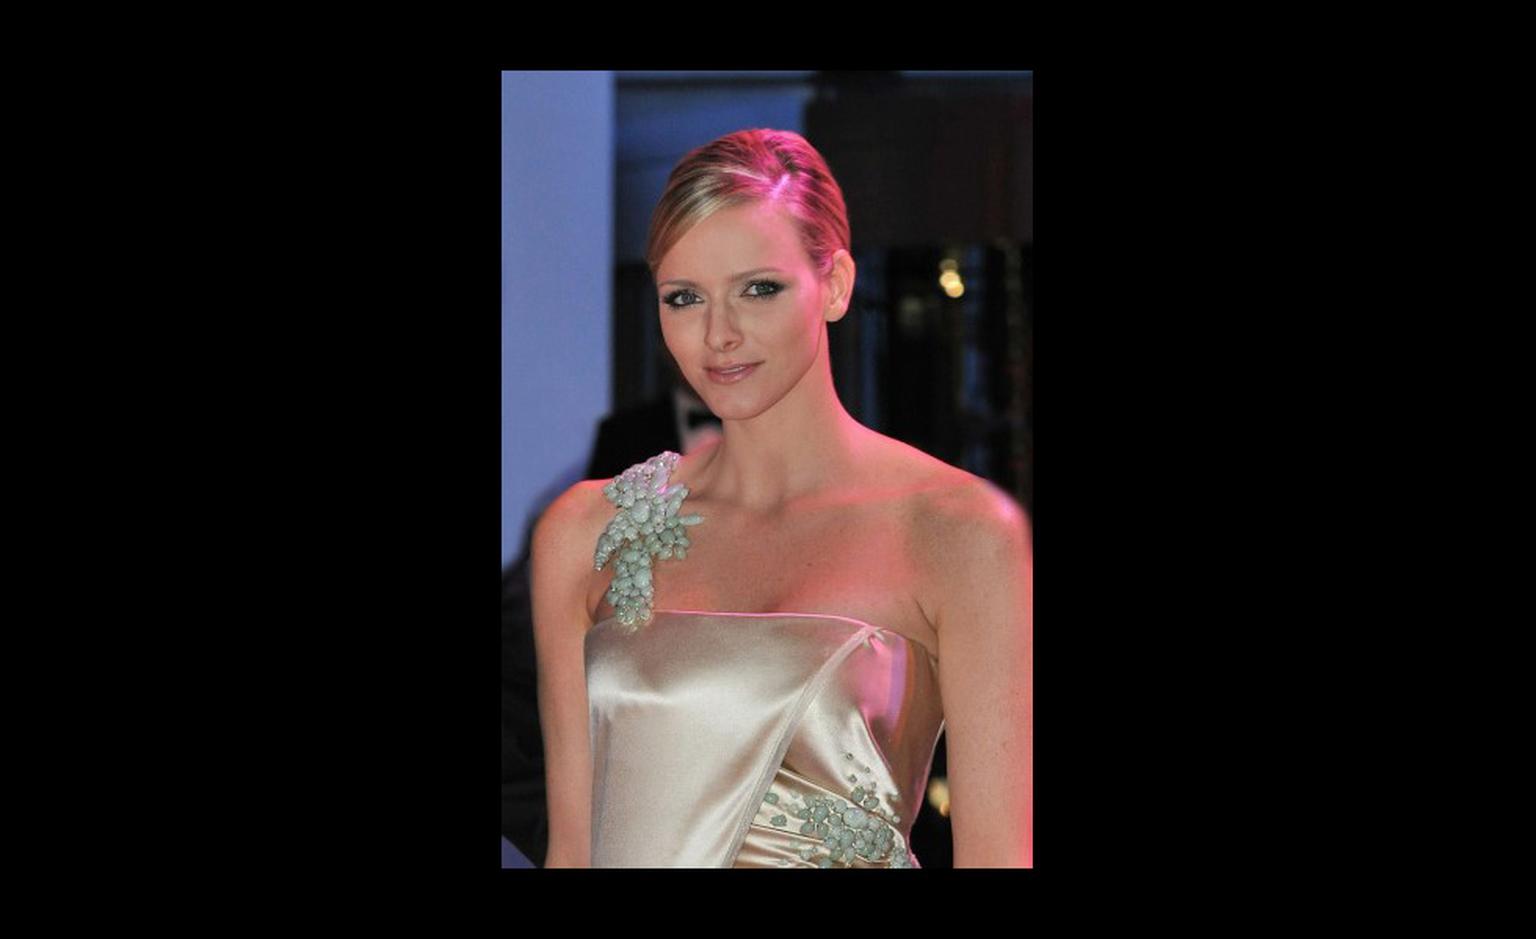 Charlene Wittstock, looking glamorous and low key on the jewellery.Photo: Prince's Palace of Monaco